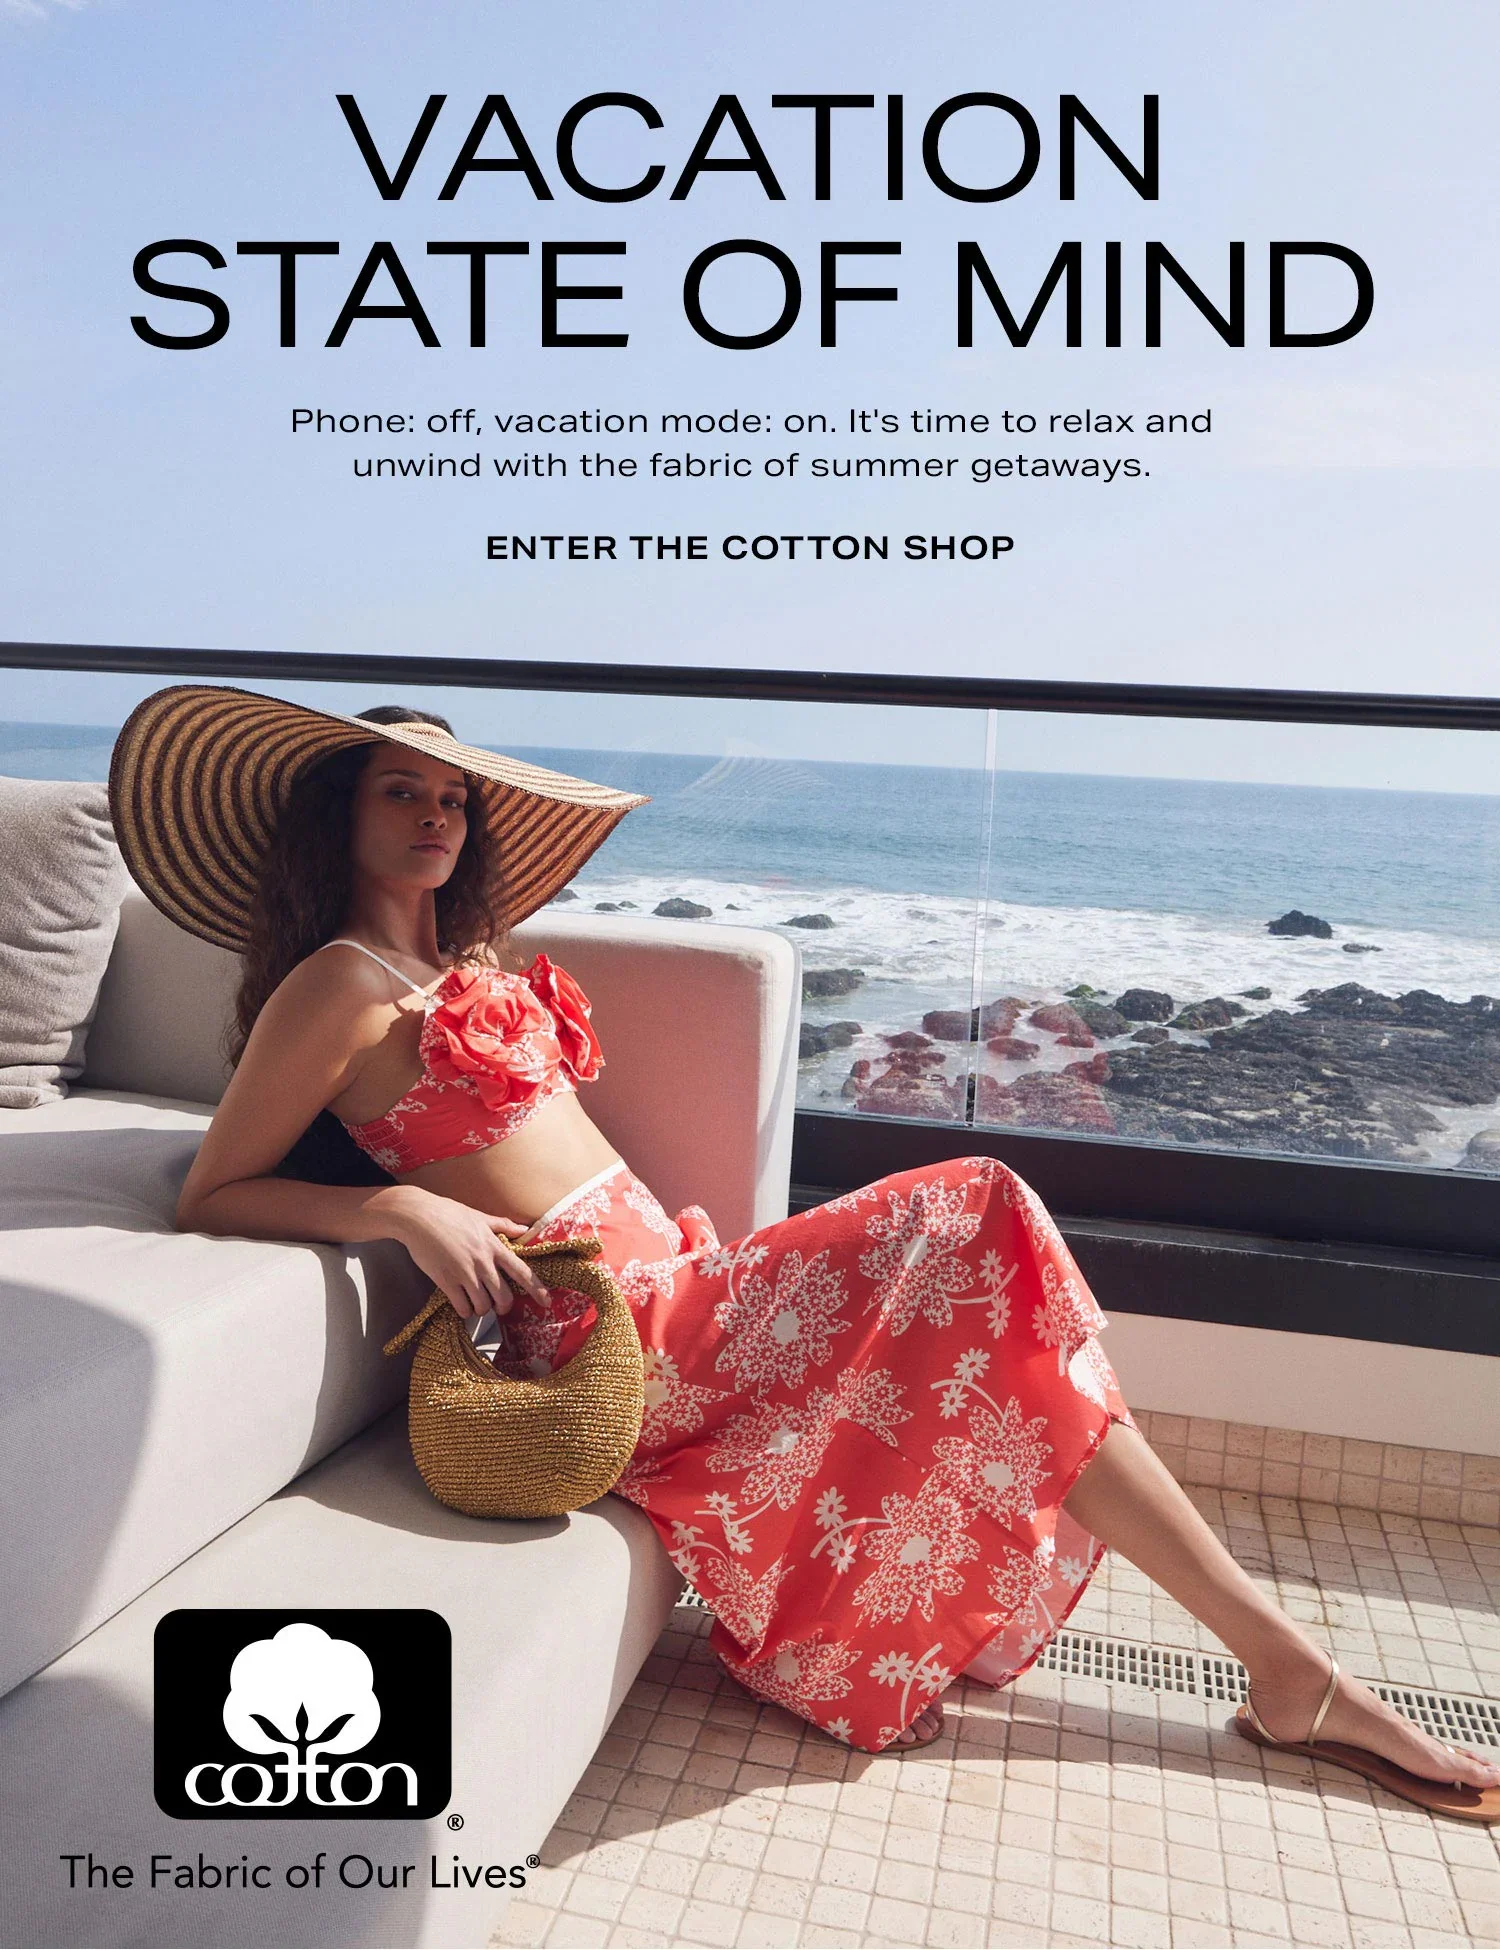 Vacation State of Mind. Enter the Cotton Shop.